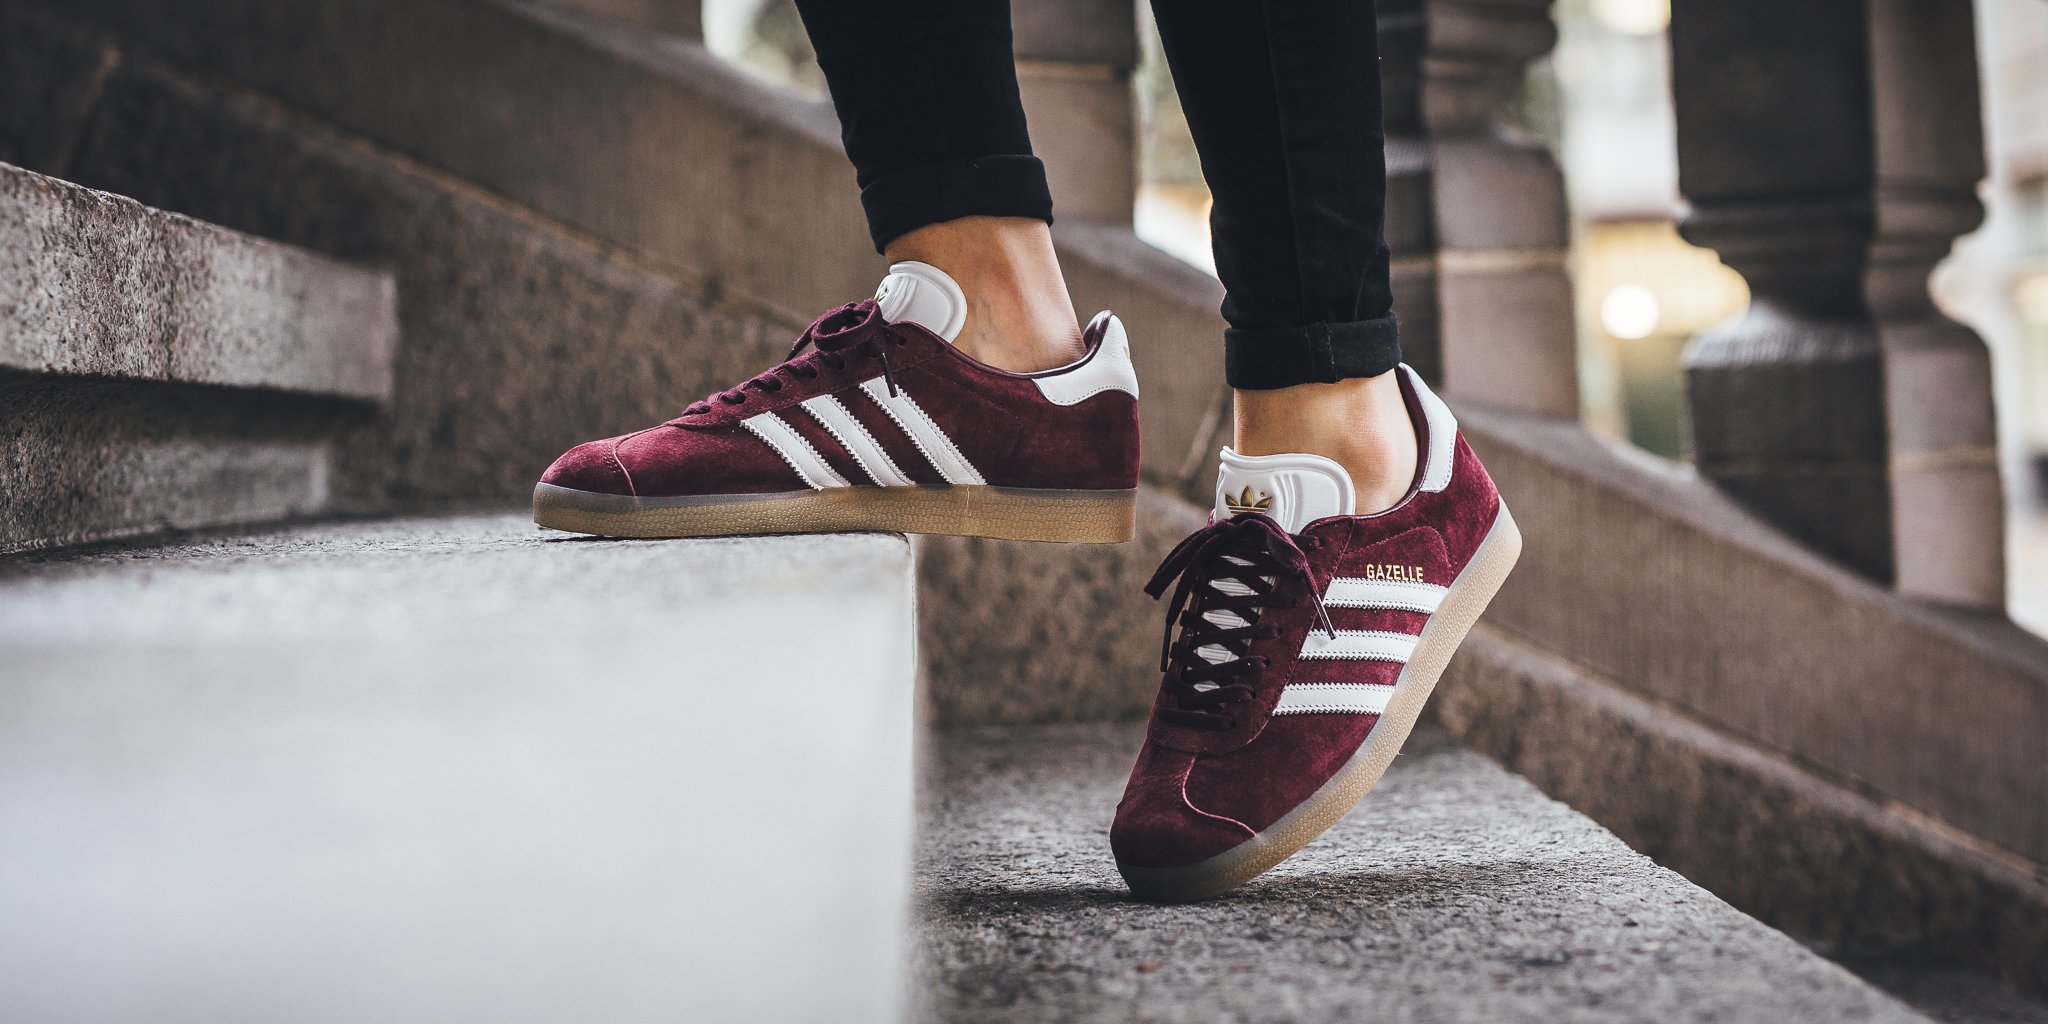 Titolo on Twitter: "NEW IN! Adidas - Maroon/White/Gold SHOP HERE: https://t.co/9FCbm27yox US 4 - 11.5 https://t.co/p7BH14e06i" / Twitter